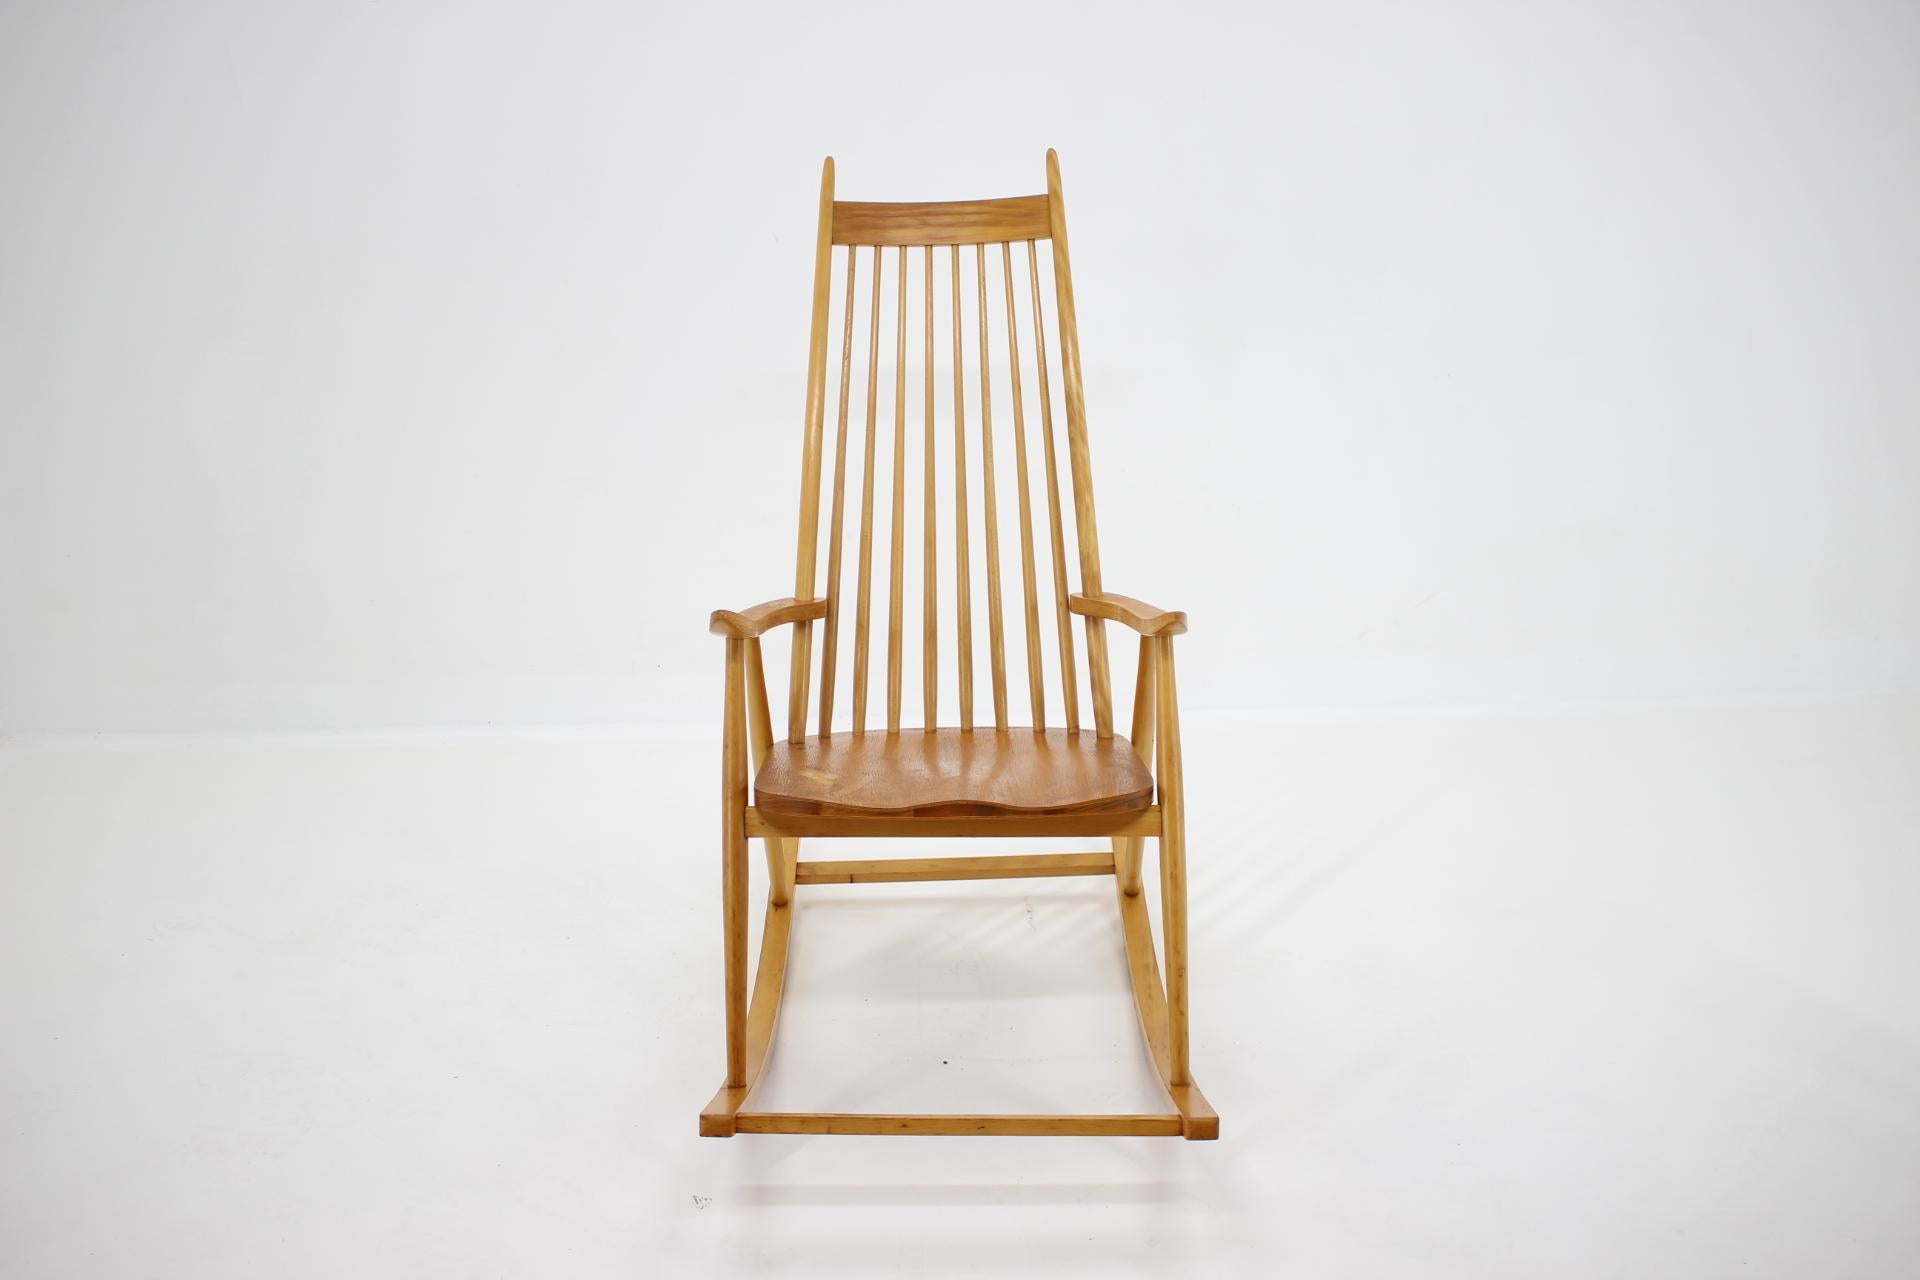 1960s Midcentury Wooden Rocking Chair, Czechoslovakia For Sale 1